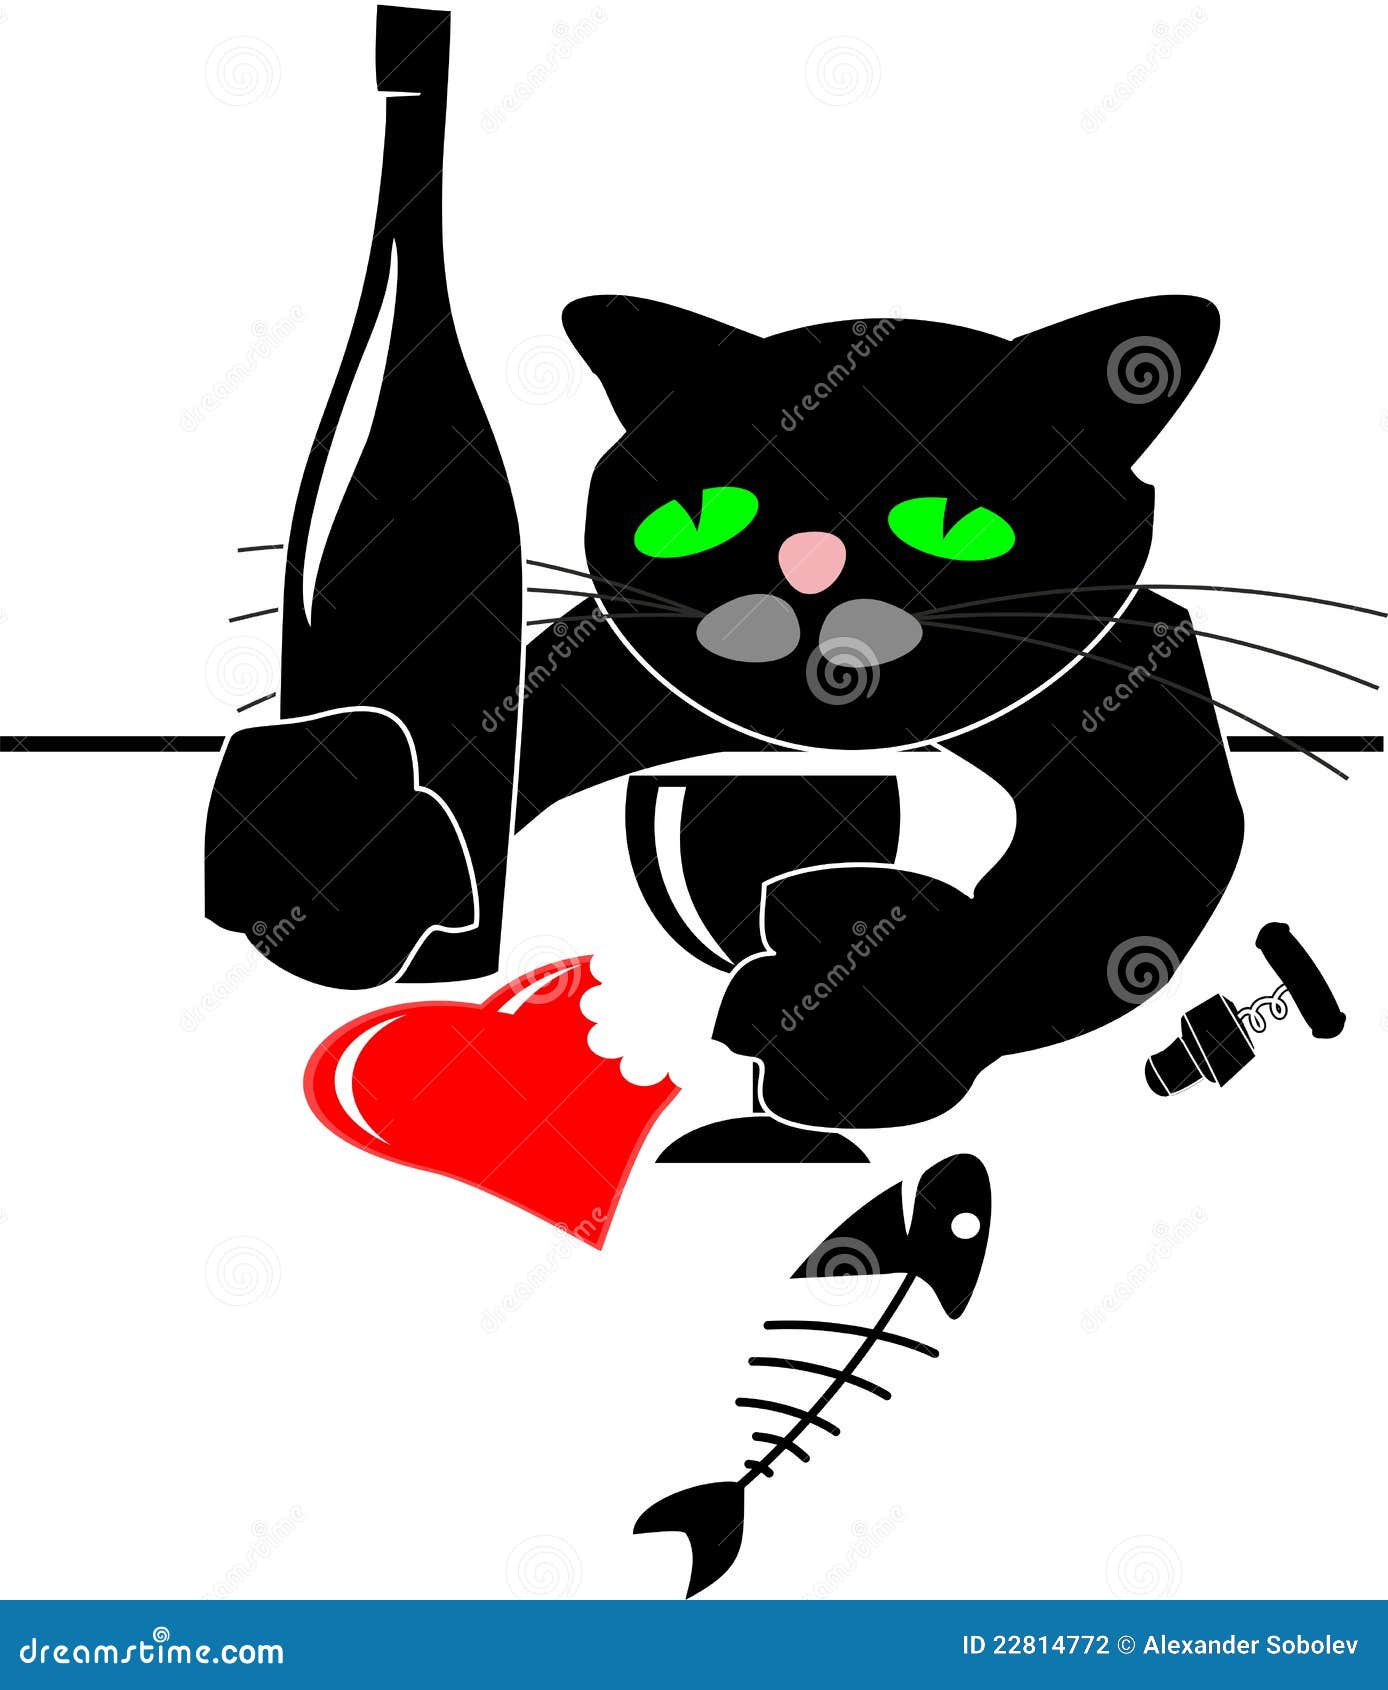 drunken black cat with red heart and bottle